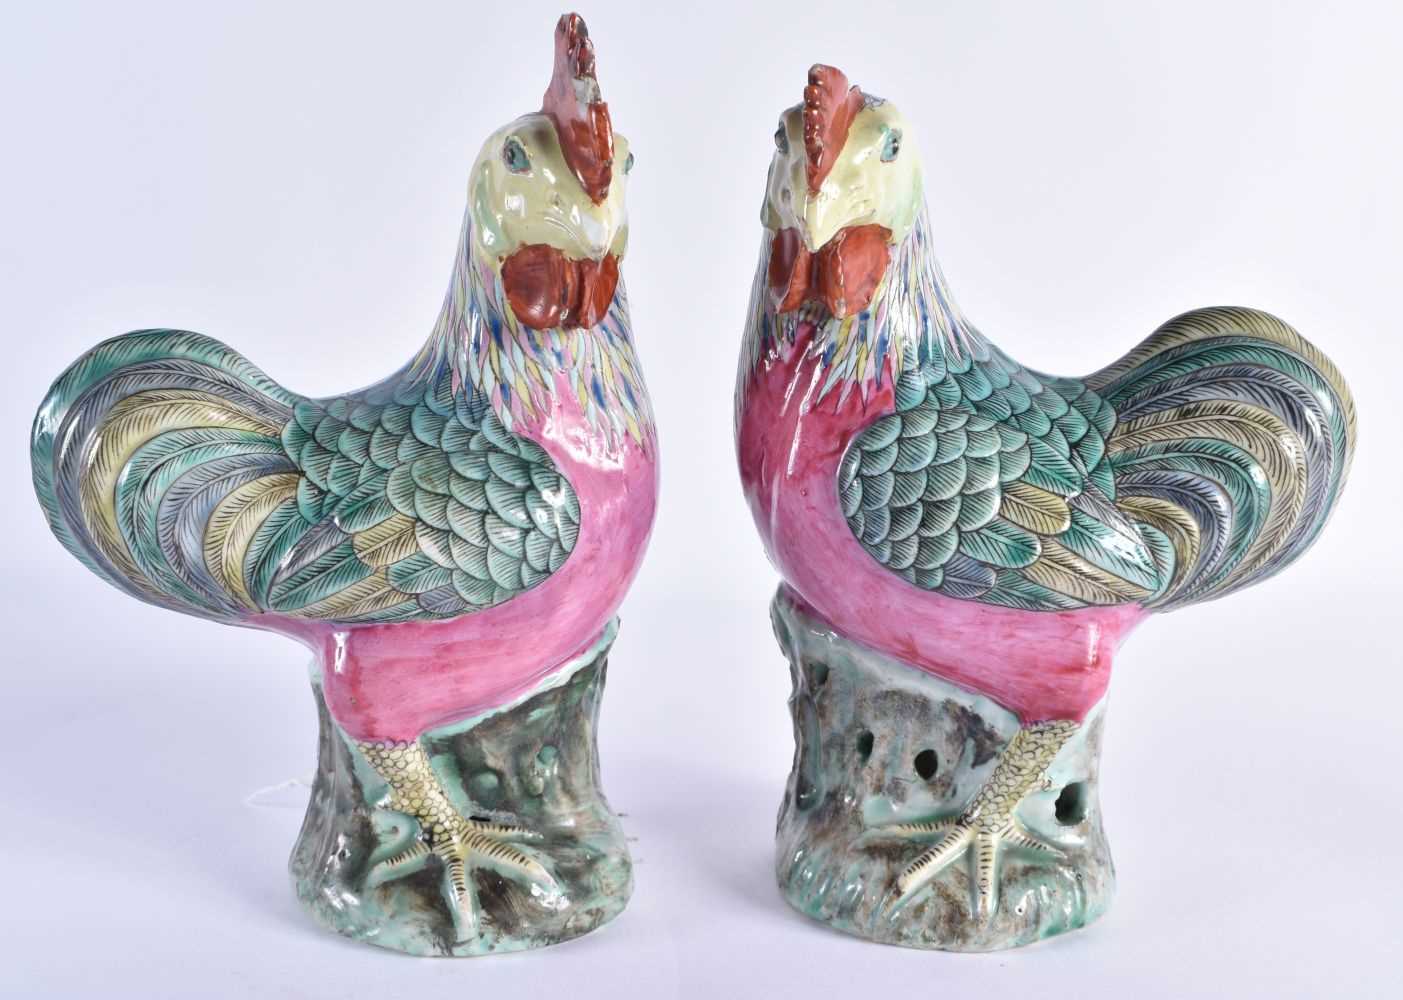 A PAIR OF EARLY 19TH CENTURY CHINESE CANTON FAMILLE ROSE FIGURES OF FOWL Qing, modelled as hens with